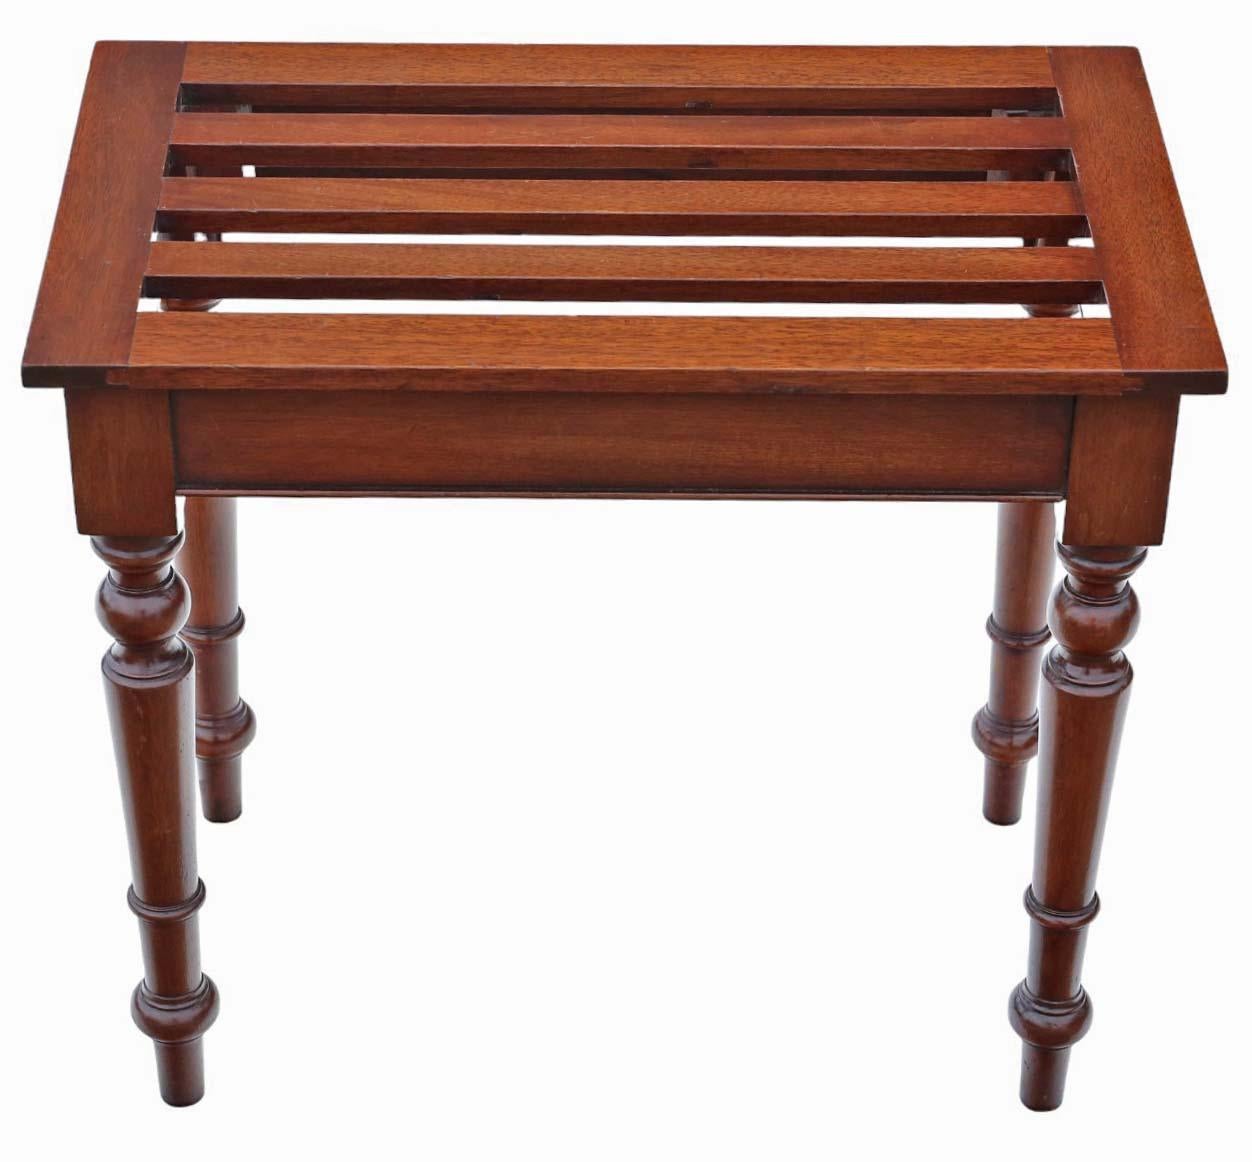 Vintage Retro Mahogany Luggage Stand - Quality Rack in Victorian Style from the mid-20th Century.

This piece boasts sturdy and durable construction, featuring no loose joints or woodworm, making it a charming and rare find of quality. Recently